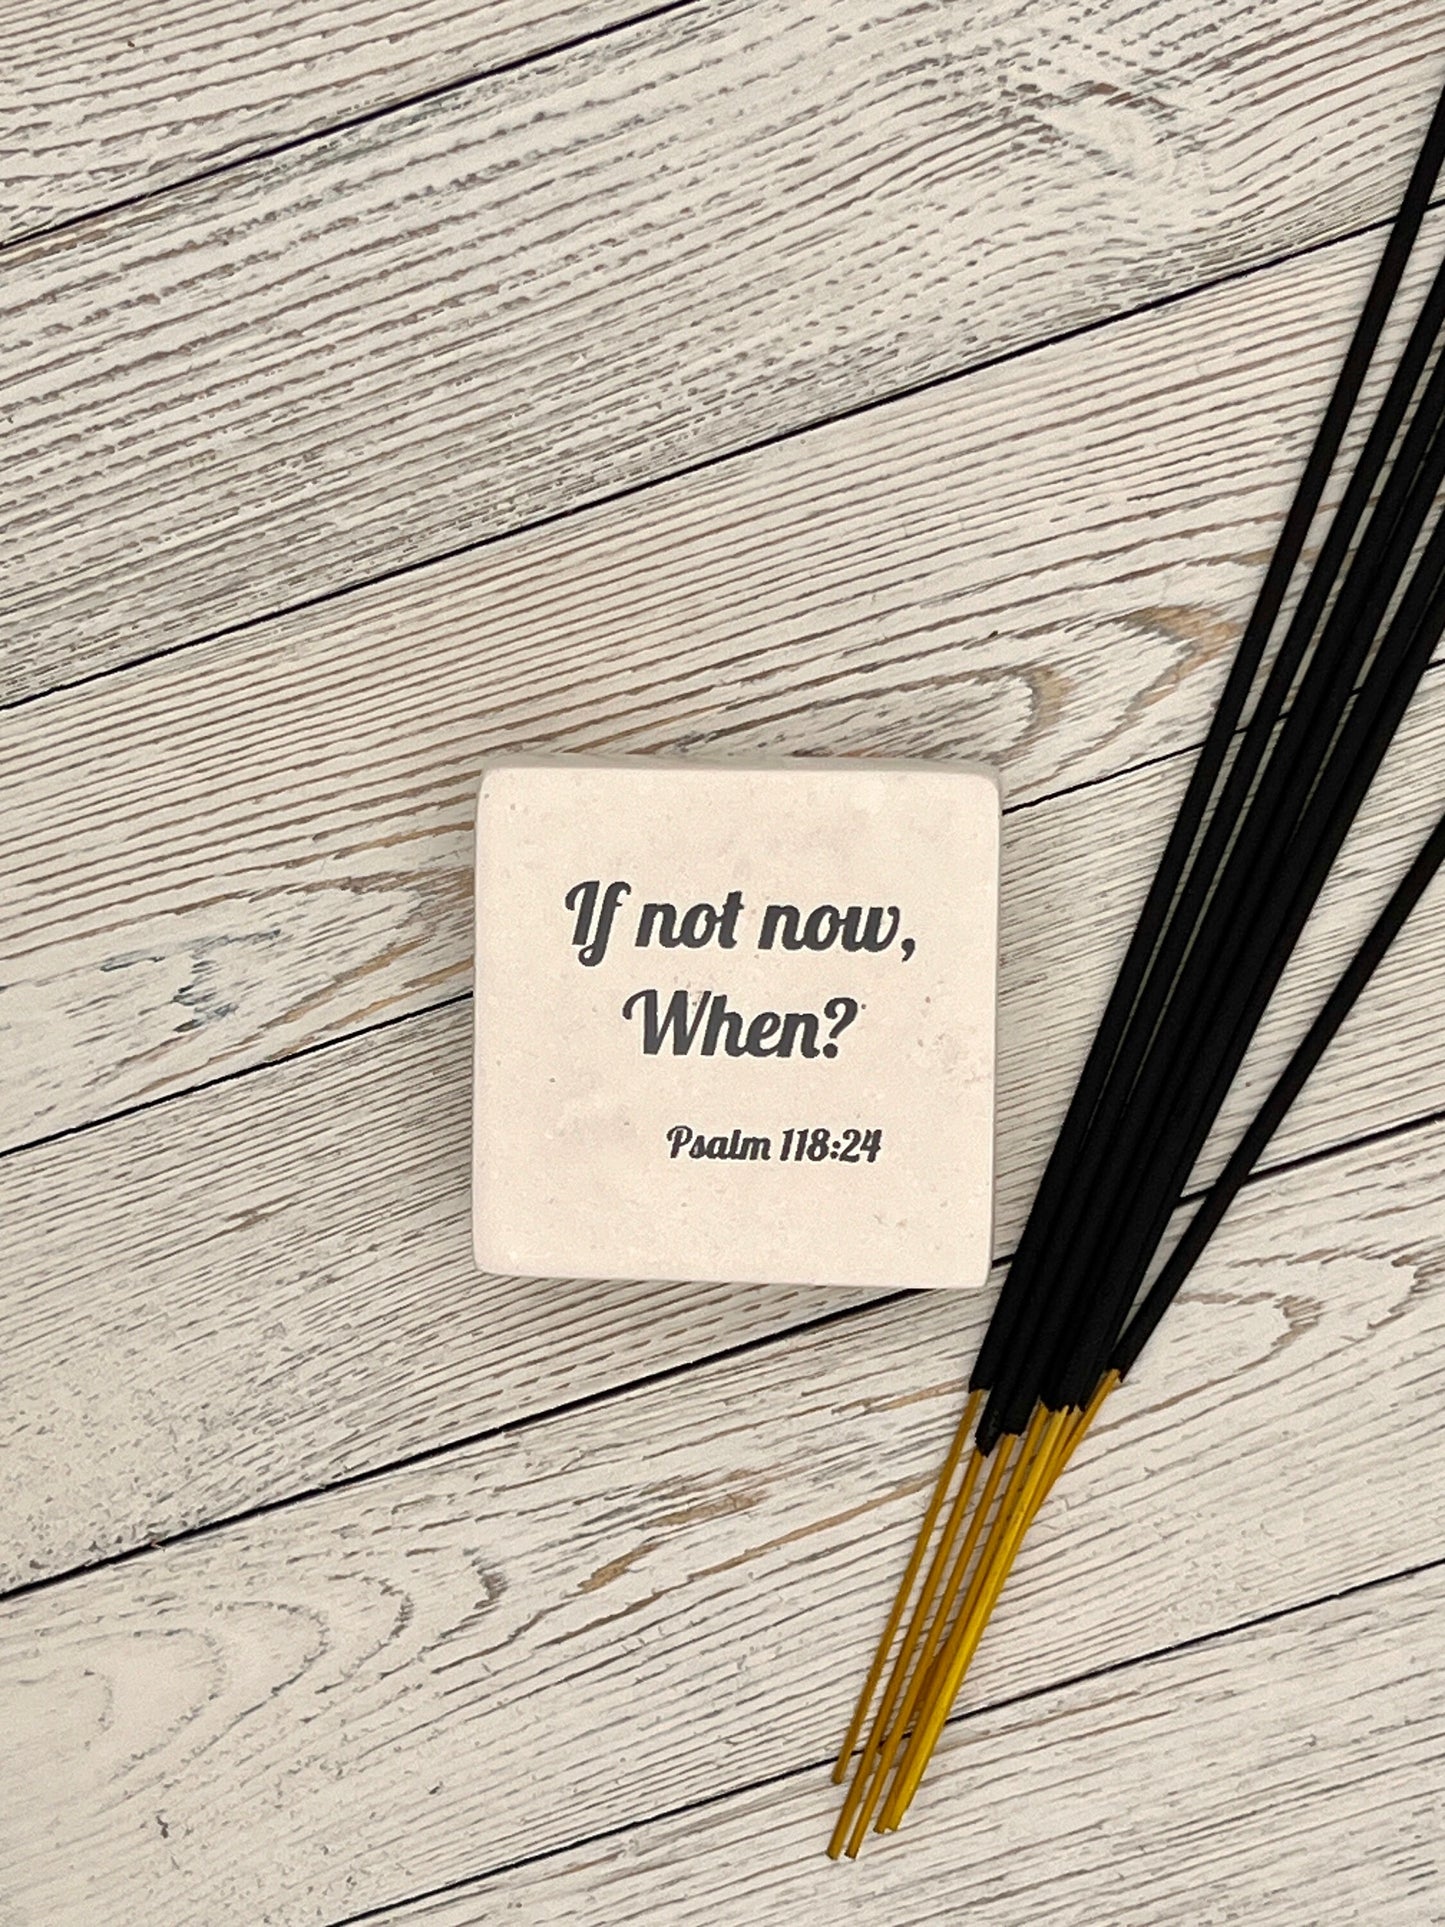 Hand-Carved Soapstone Scripture 2" by 2" - Bible Verse Psalm 118:24